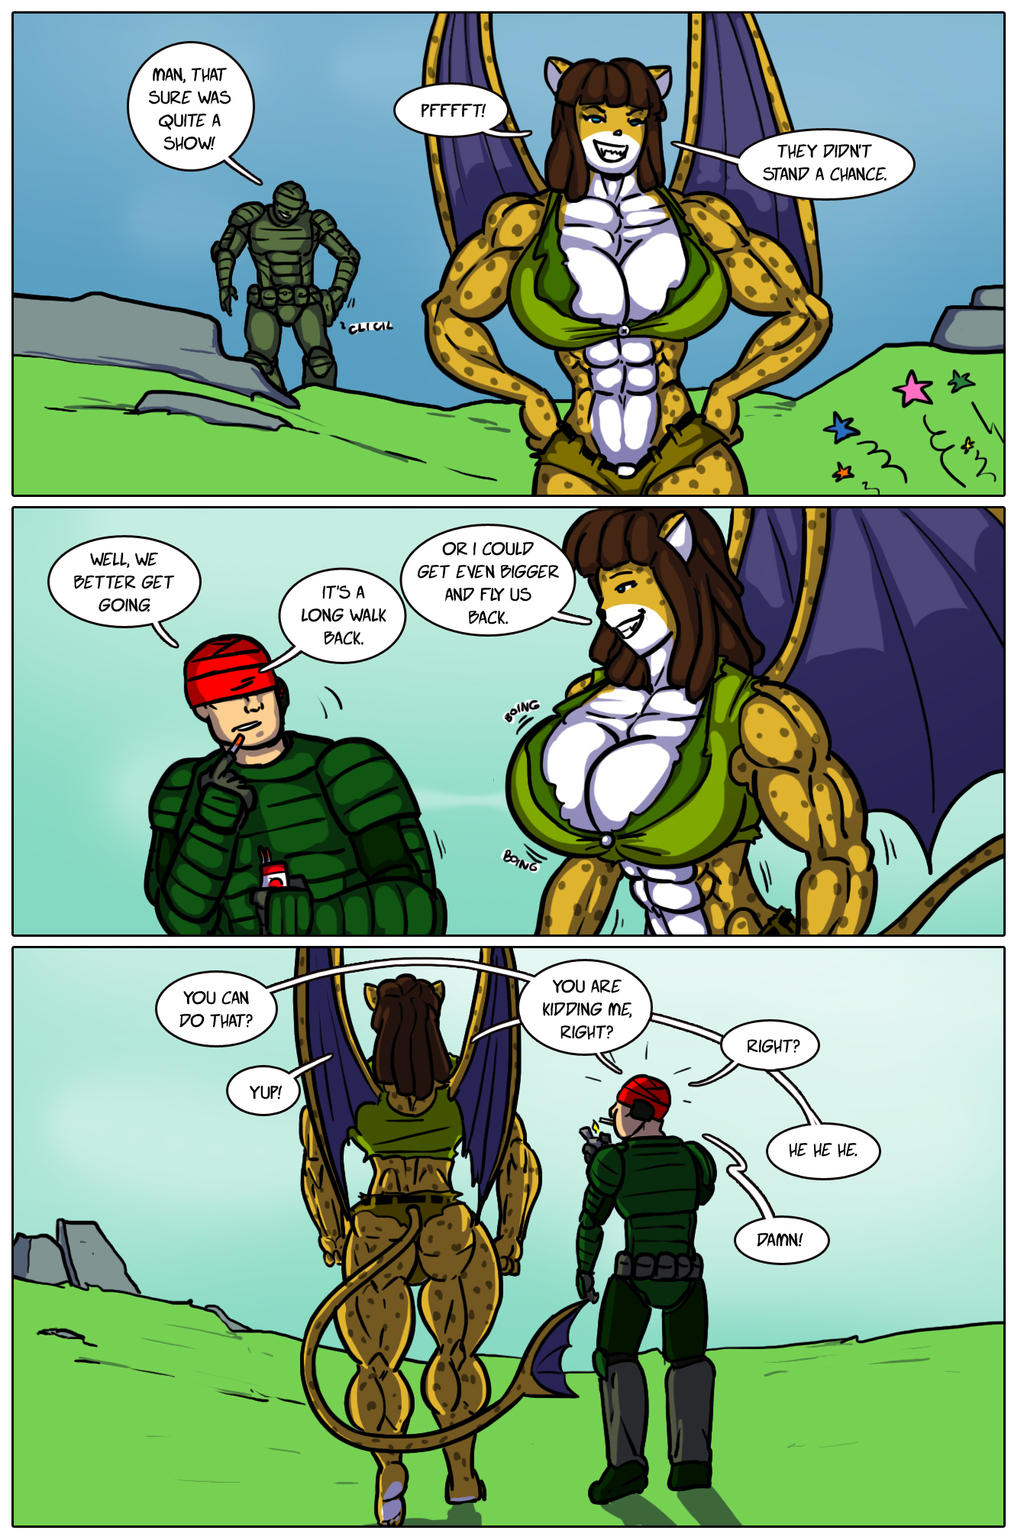 comic page commission 62 by ritualist on deviantart.